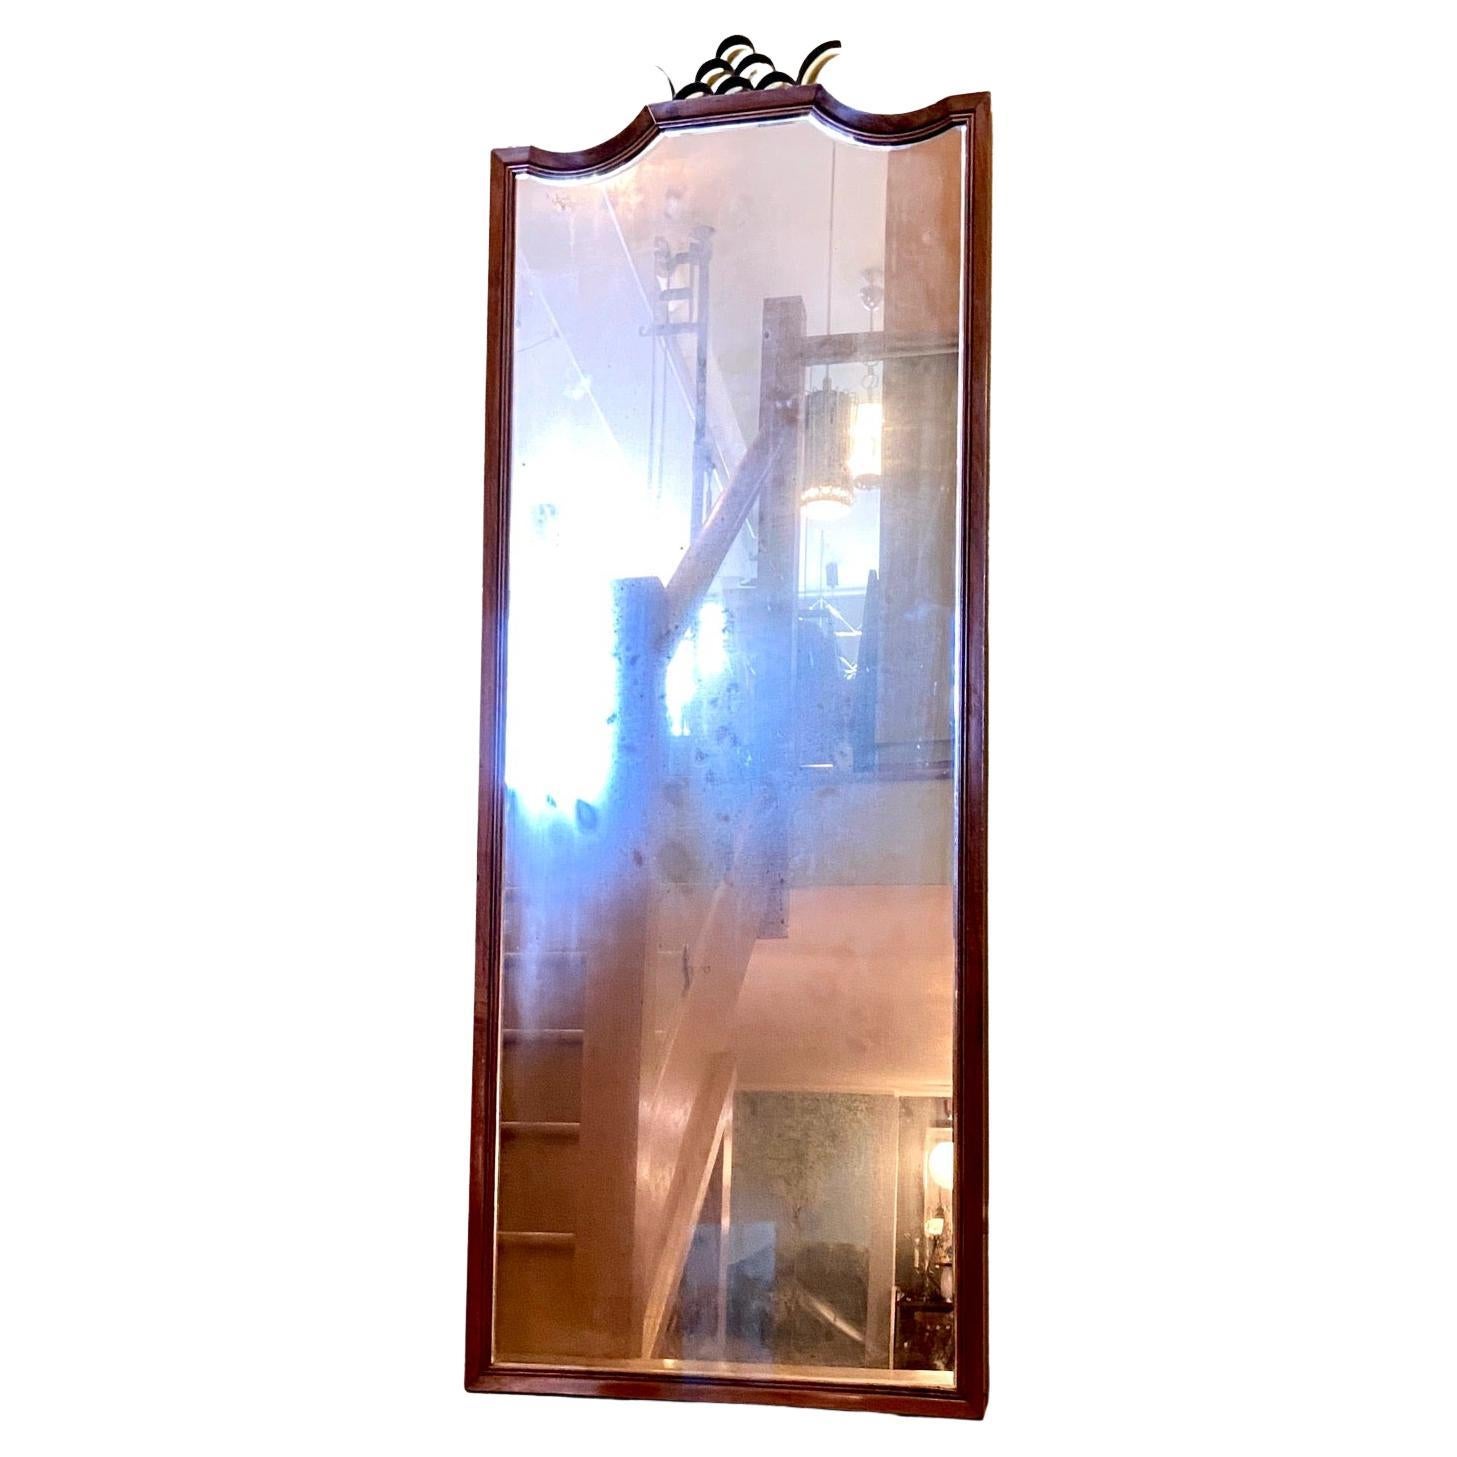 PAOLO BUFFA  & ANTONIO CASSI RAMELLI  mirror, execution by Paolo Lietti e Figli, Cantù. 
A Paolo Buffa good quality, heavy 1930s Art Deco Figured Walnut full length wall mirror with a thick black metal Crown decoration (possibly bronze). The